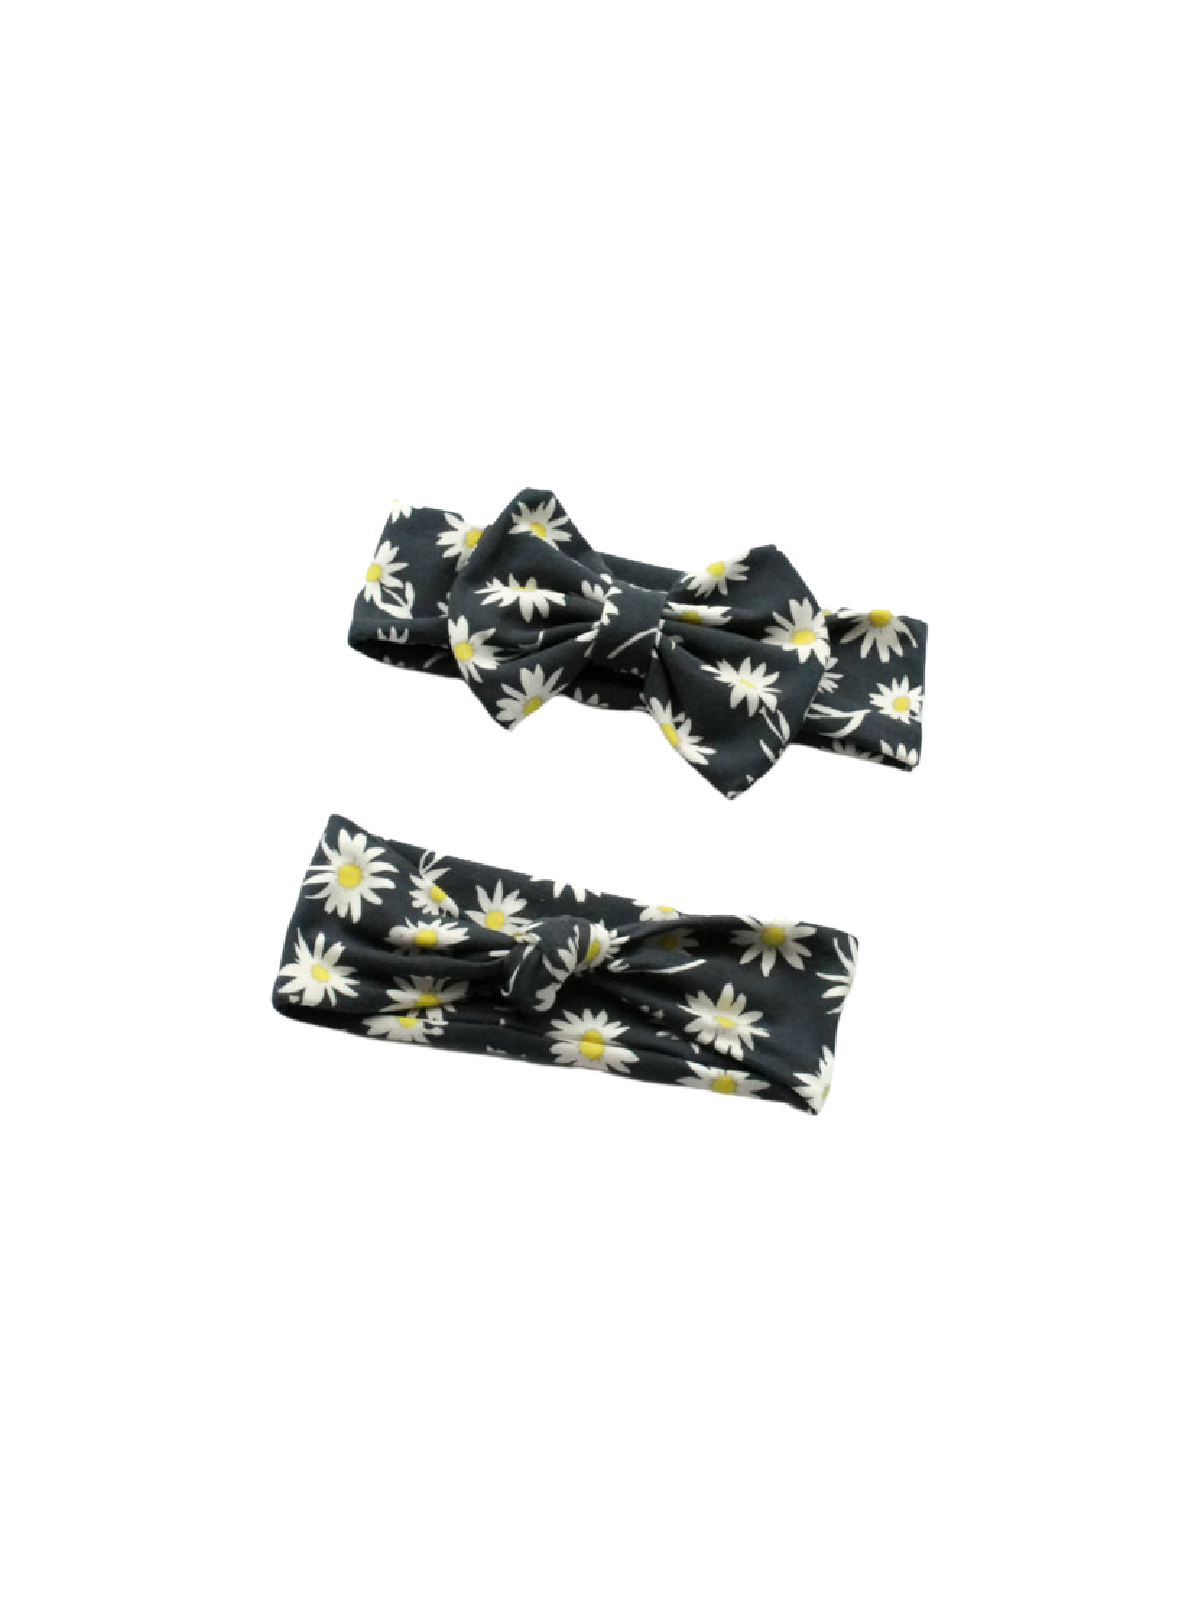 Daisies Floral Mommy and Me Headbands Set